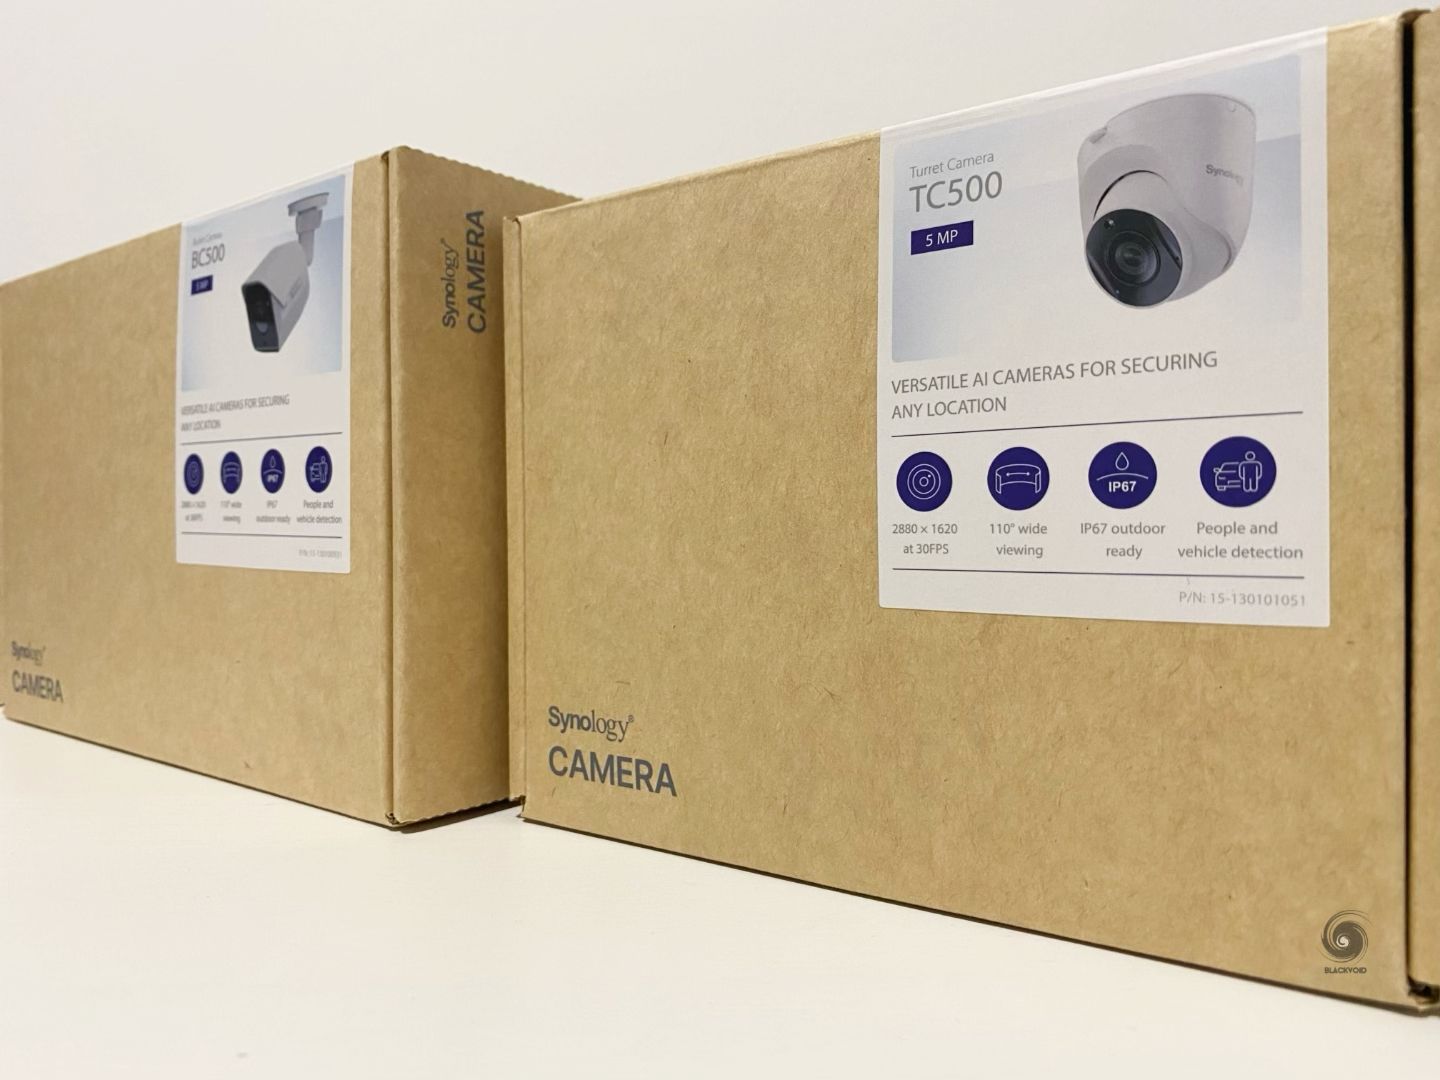 Synology BC500 and TC500 Surveillance Cameras - Should You Buy